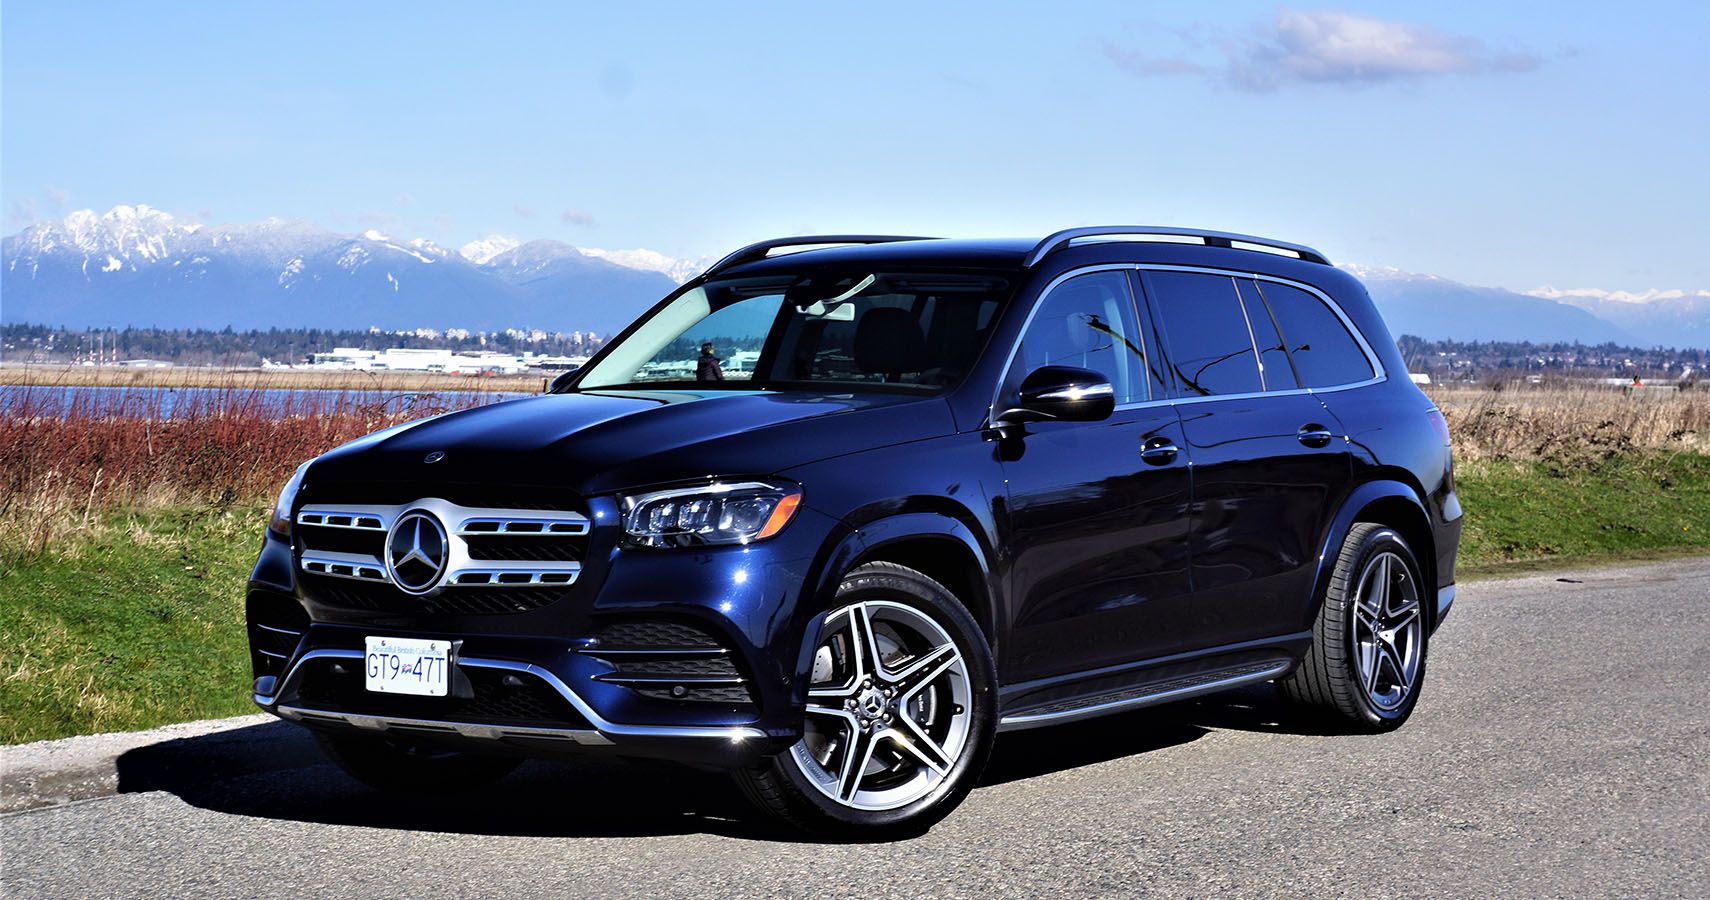 2021 Mercedes-Benz GLS 450 Review: Three-Row Luxury SUV At Its Best